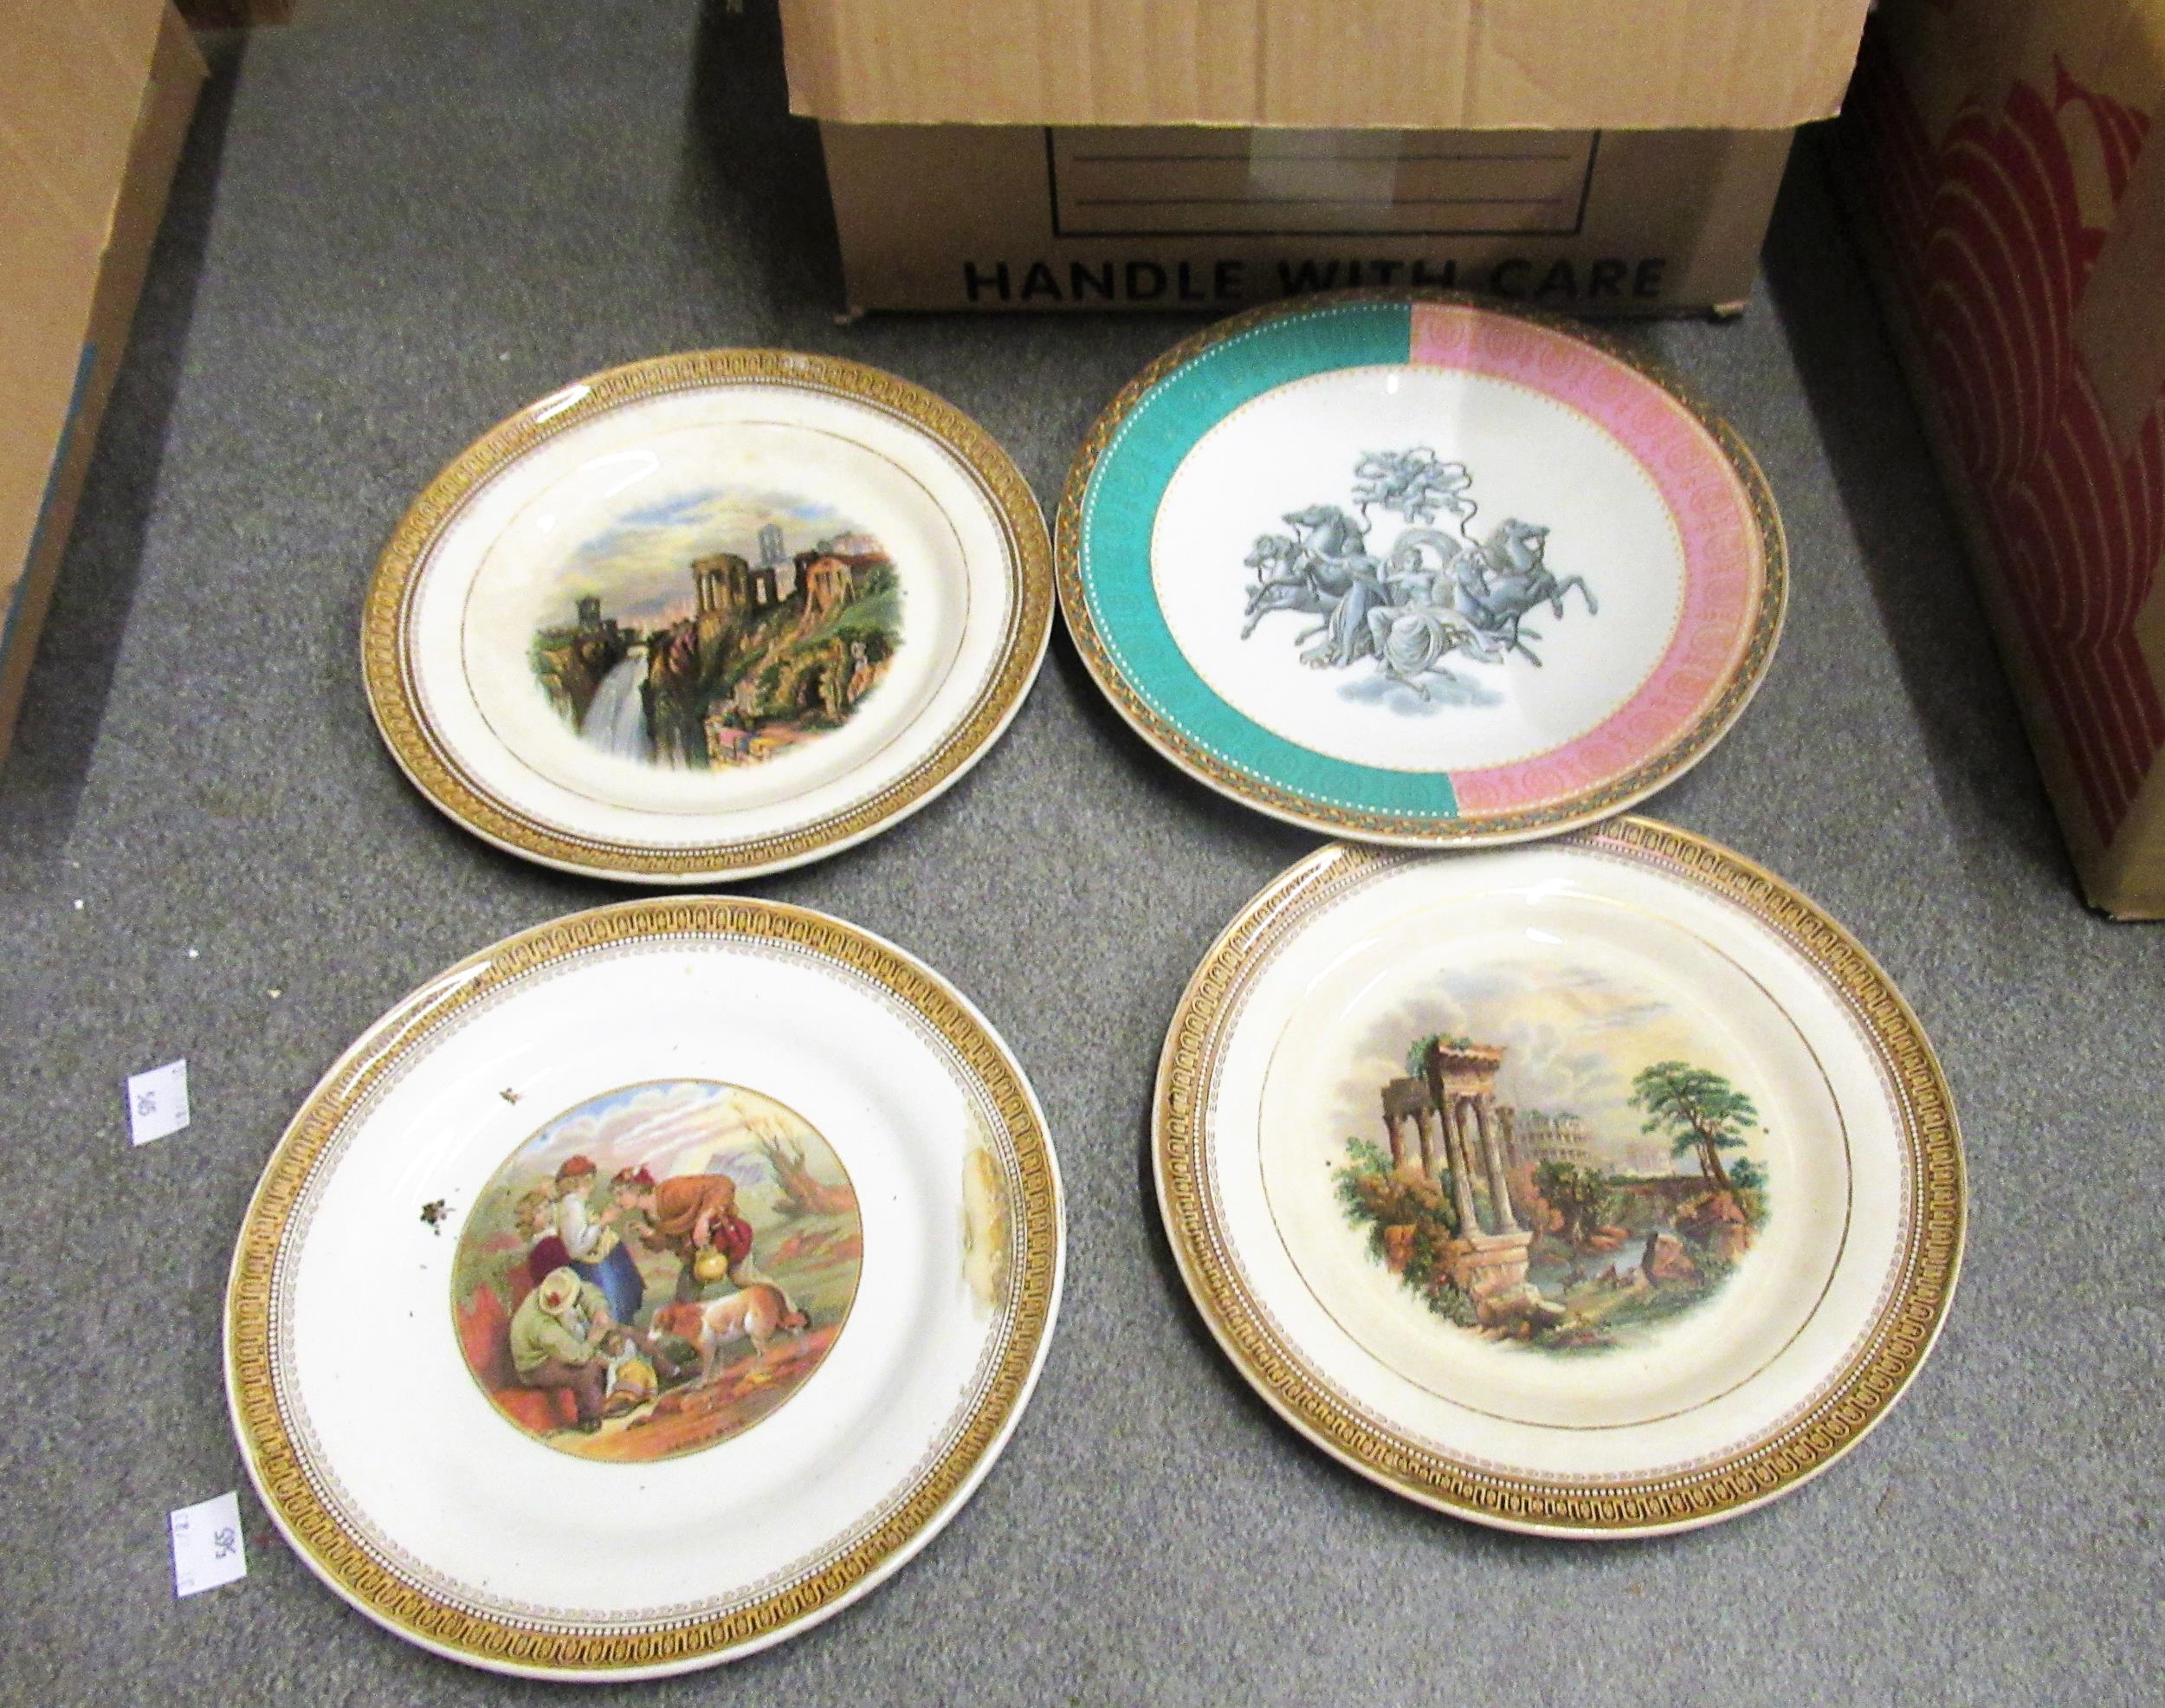 Collection of various 19th and early 20th Century Prattware plates, a mug and other ceramics - Image 3 of 5